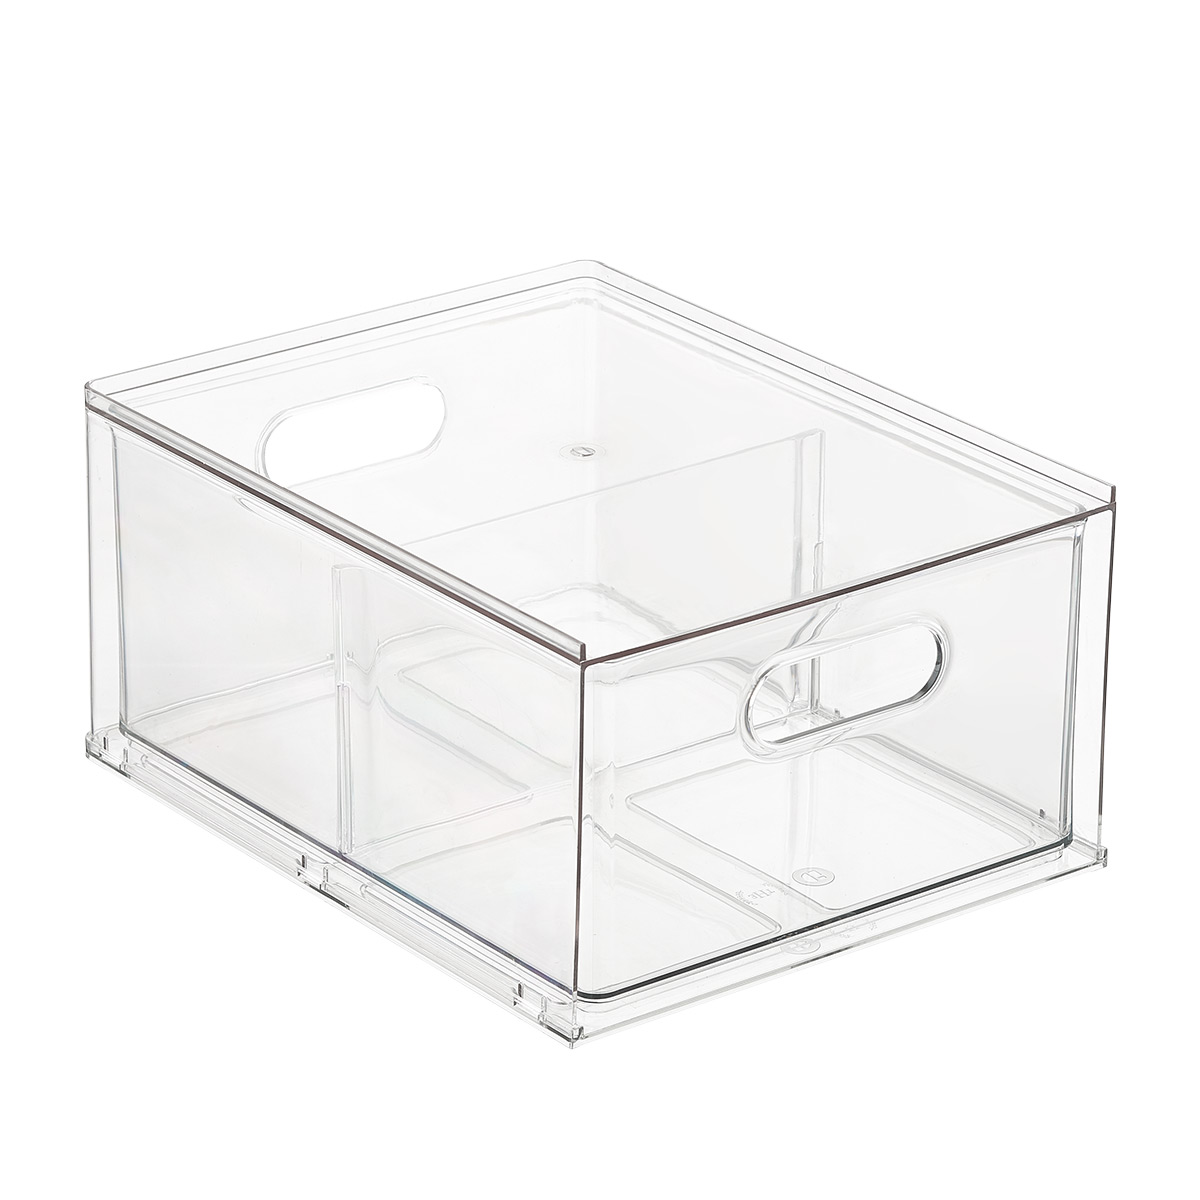 https://www.containerstore.com/catalogimages/364014/10077088-T.H.E.-large-drawer-v2.jpg